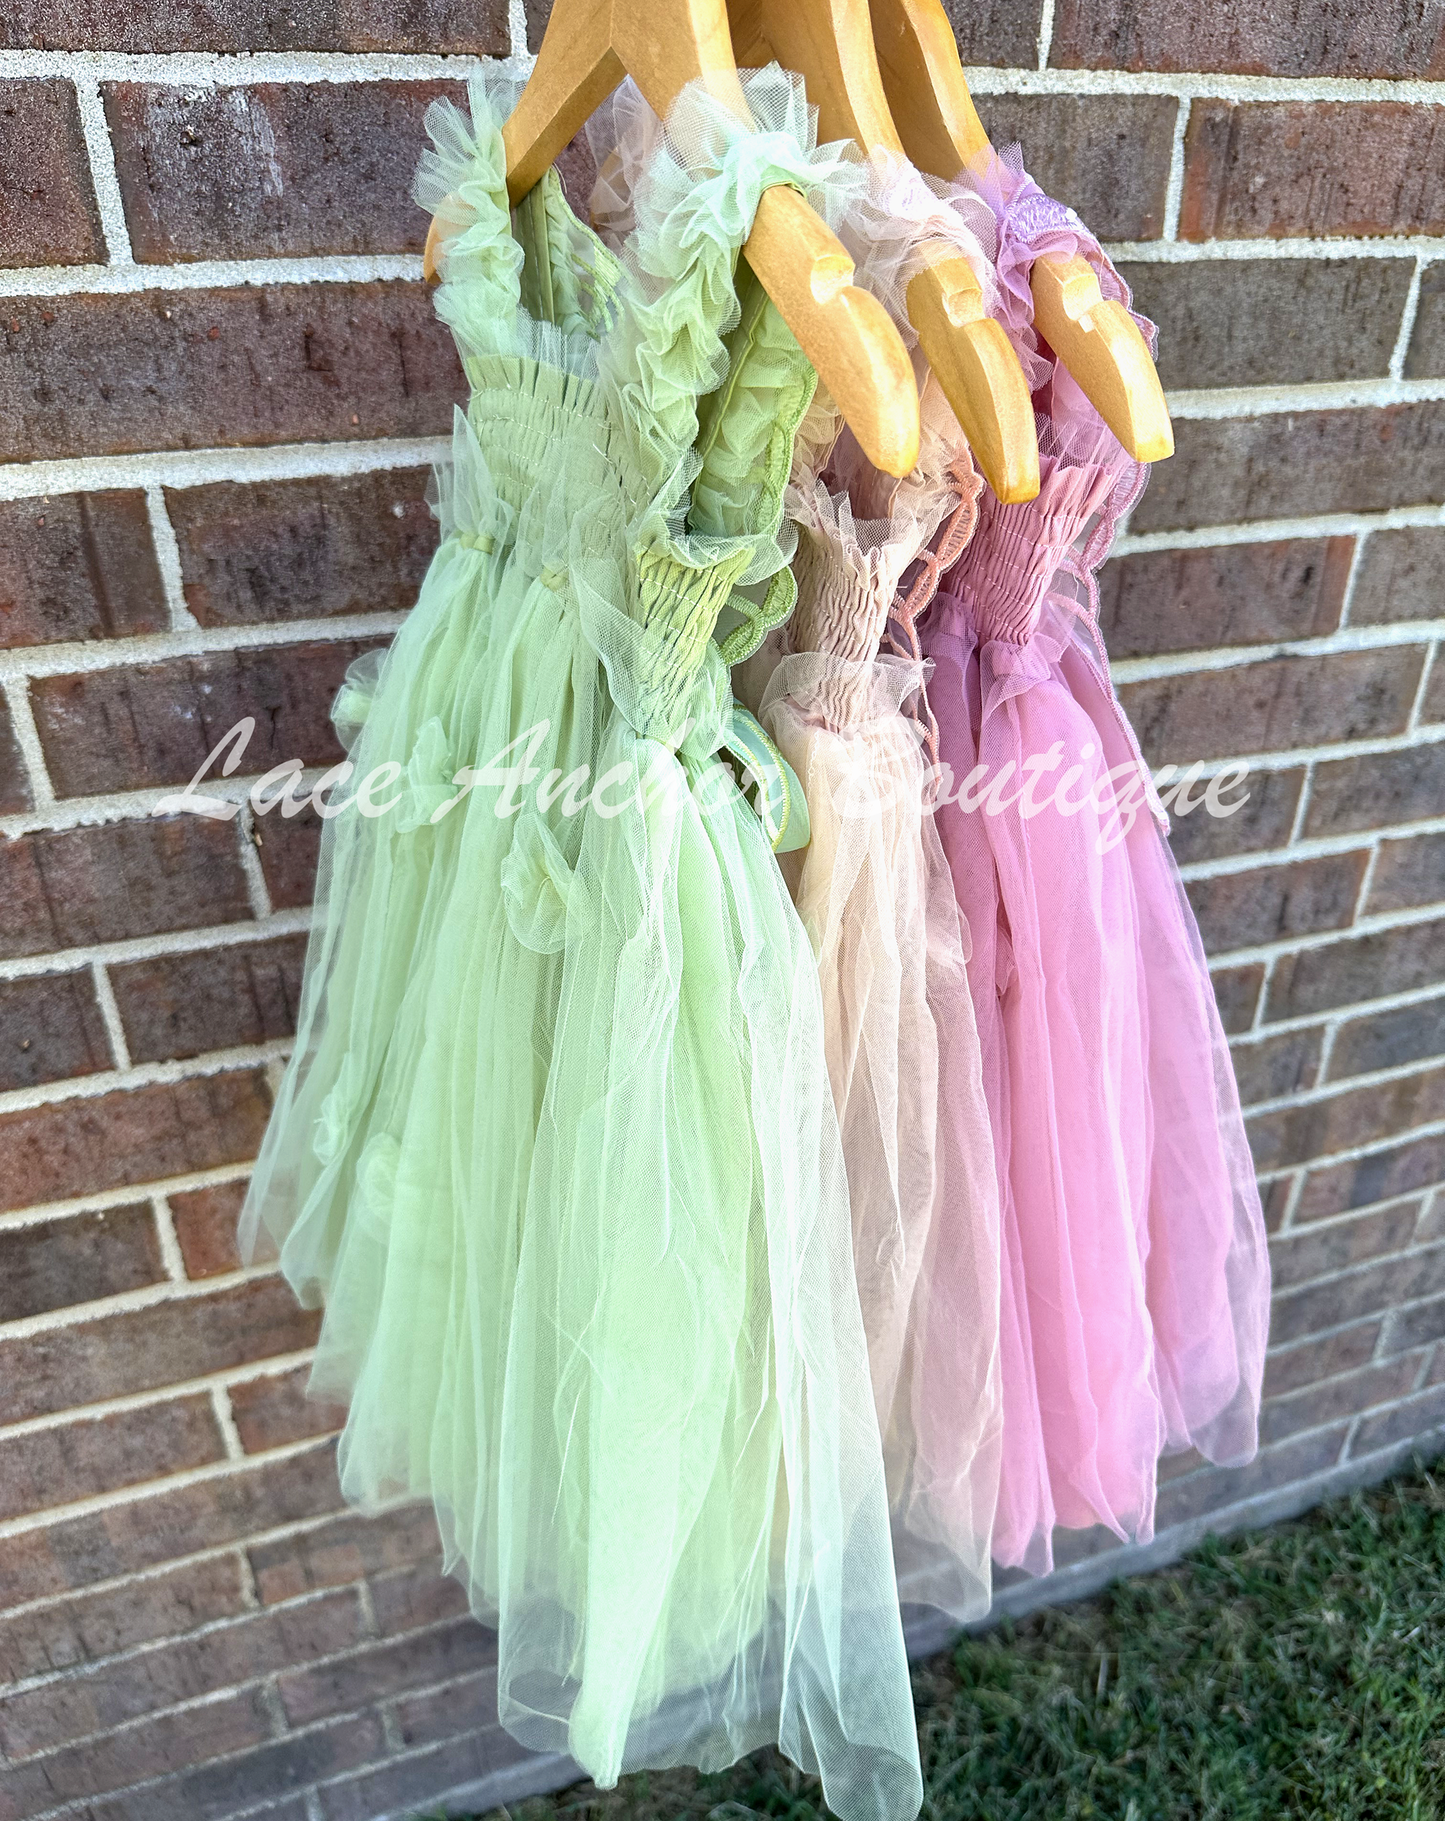 Sage green, champagne beige, and mauve pink tulle fairy girls dresses with smocked top and tulle flowers on skirt. Attached butterfly wings and ruffled straps.